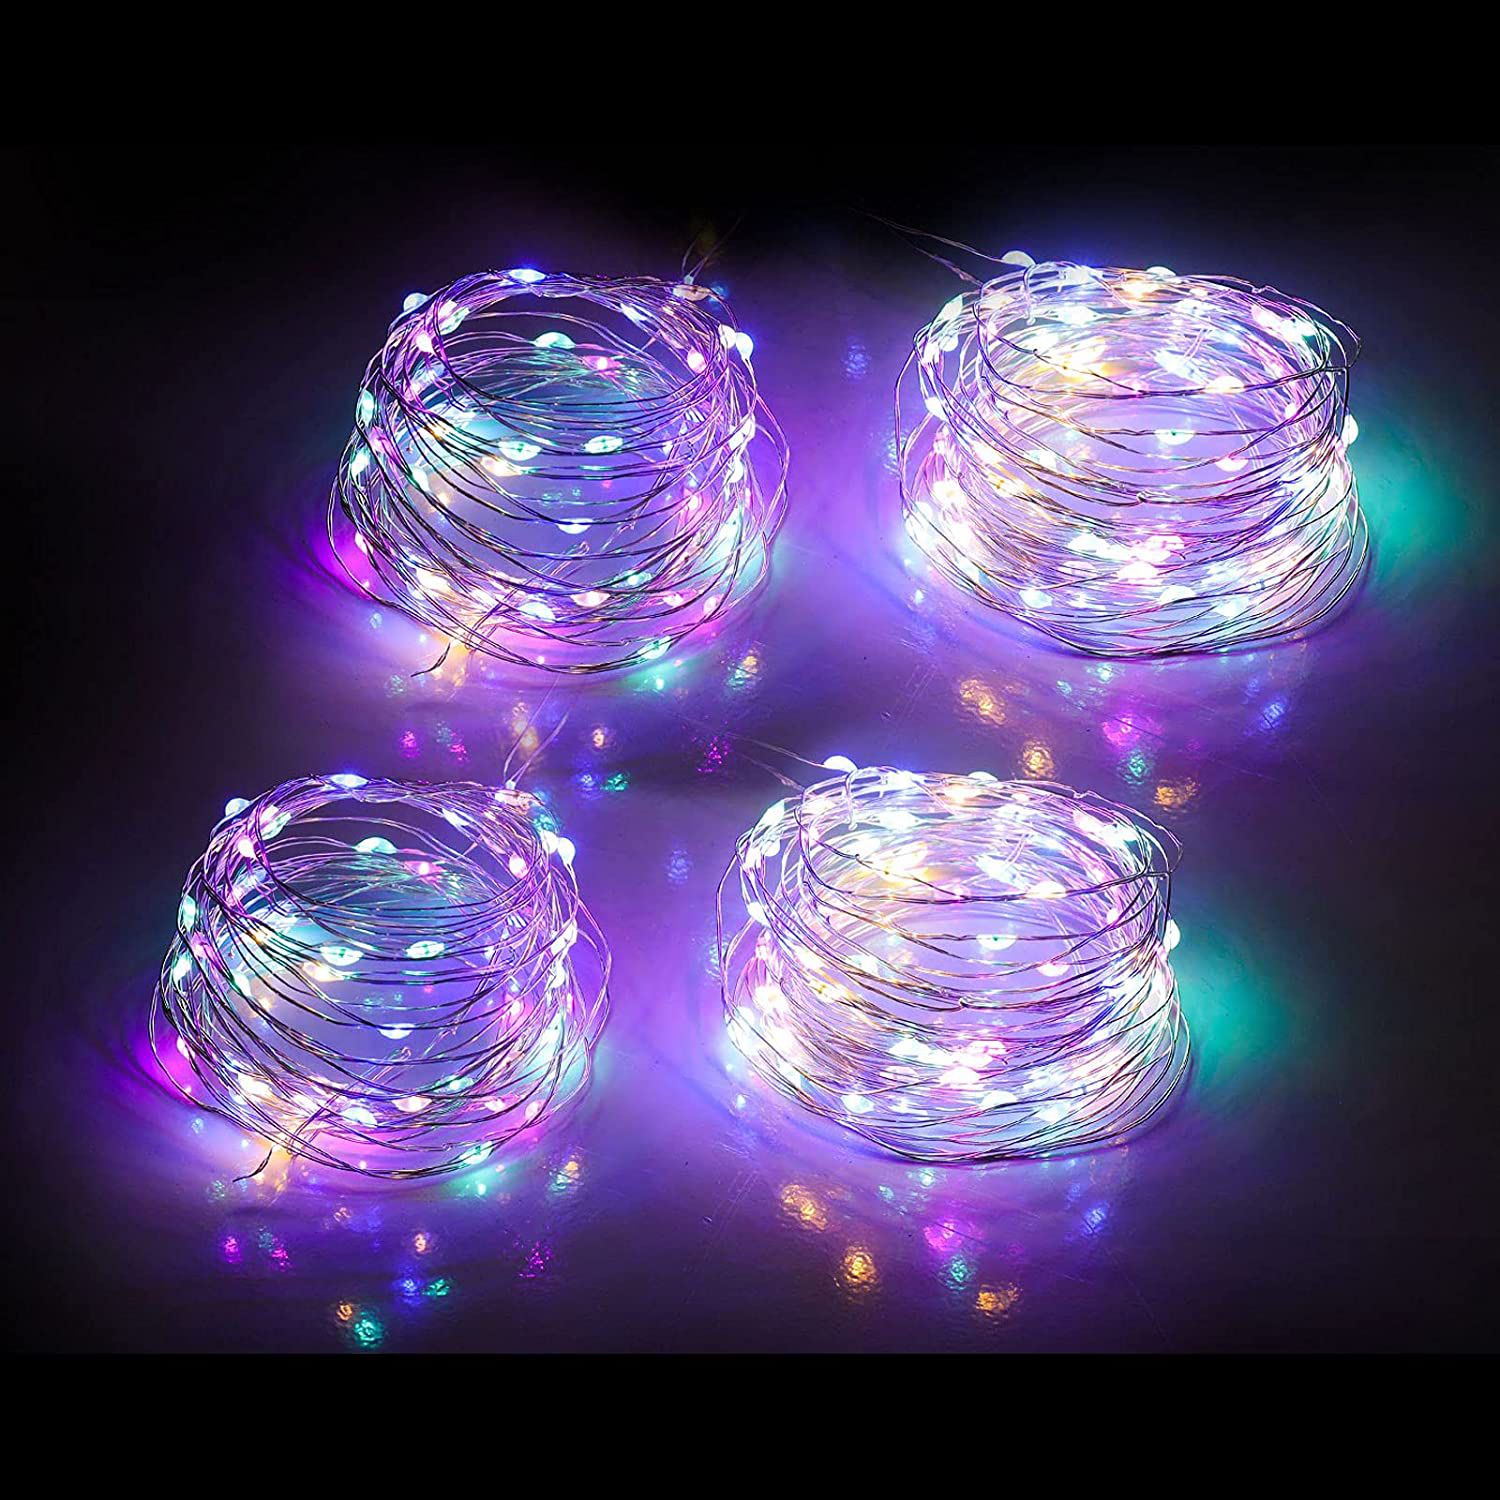 4 Pack Fairy Lights Battery Operated, Mandiq String Lights 10ft 30 LEDs, Flashing and Constant Light Mode, Silver Wire Mini Lights for Festival, Chris